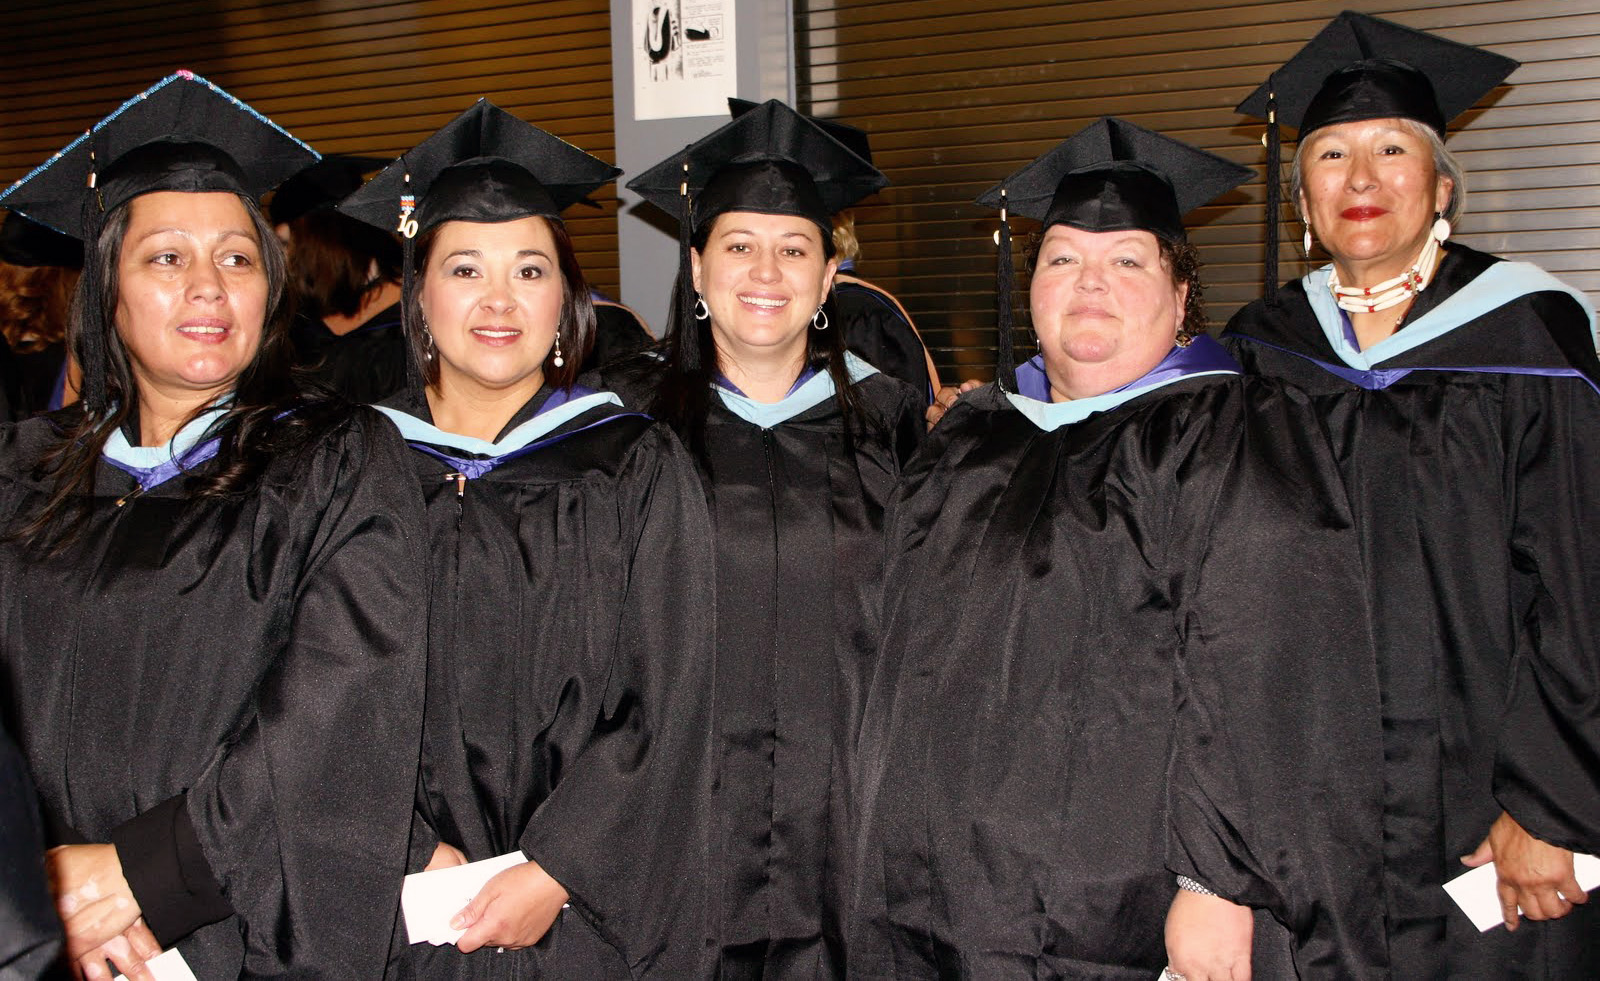 I LEAD graduates attend commencement ceremony